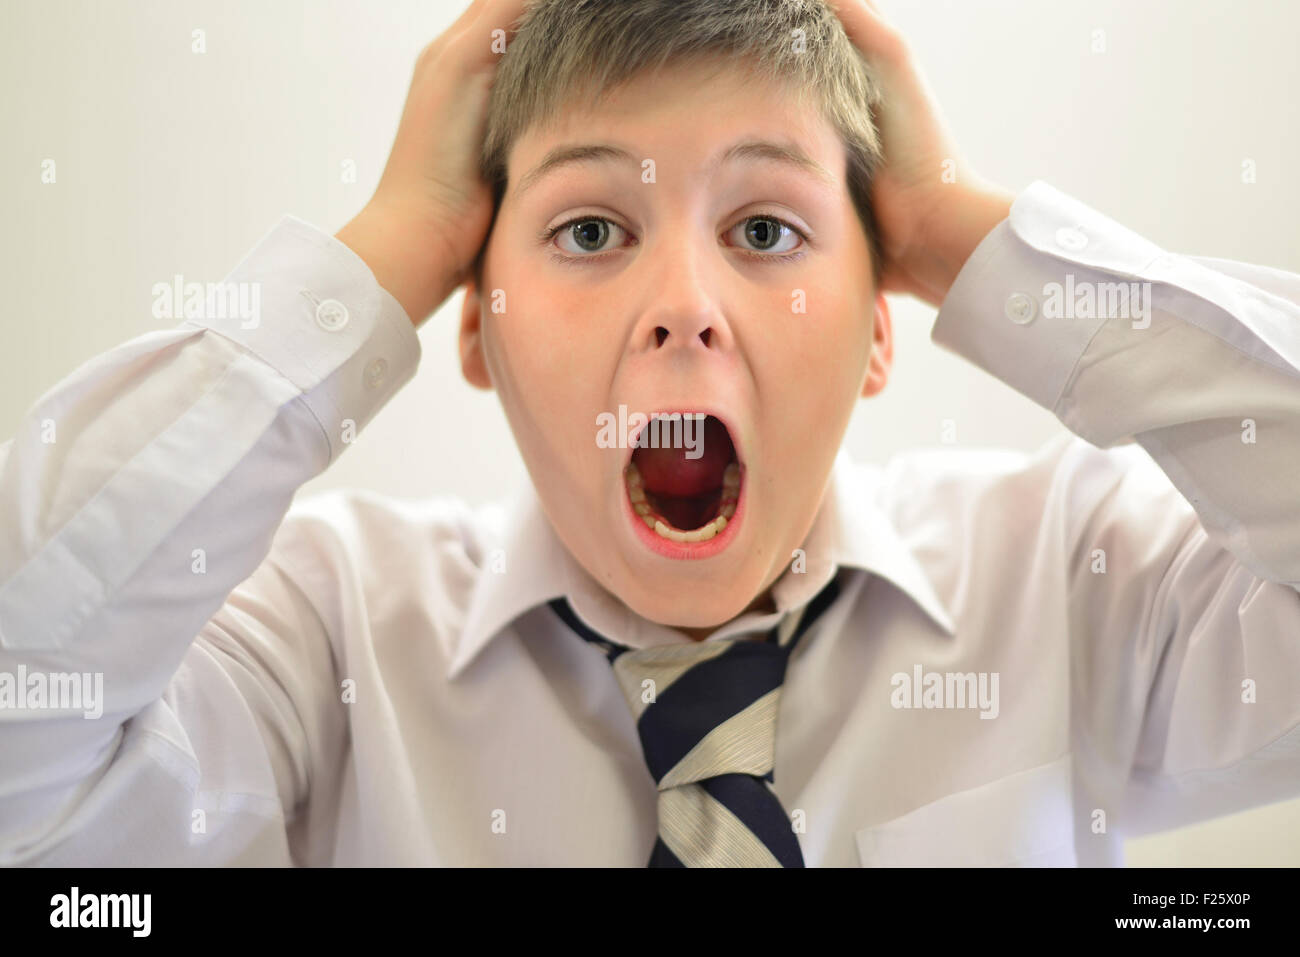 Teen boy screaming holding his hands behind  head Stock Photo